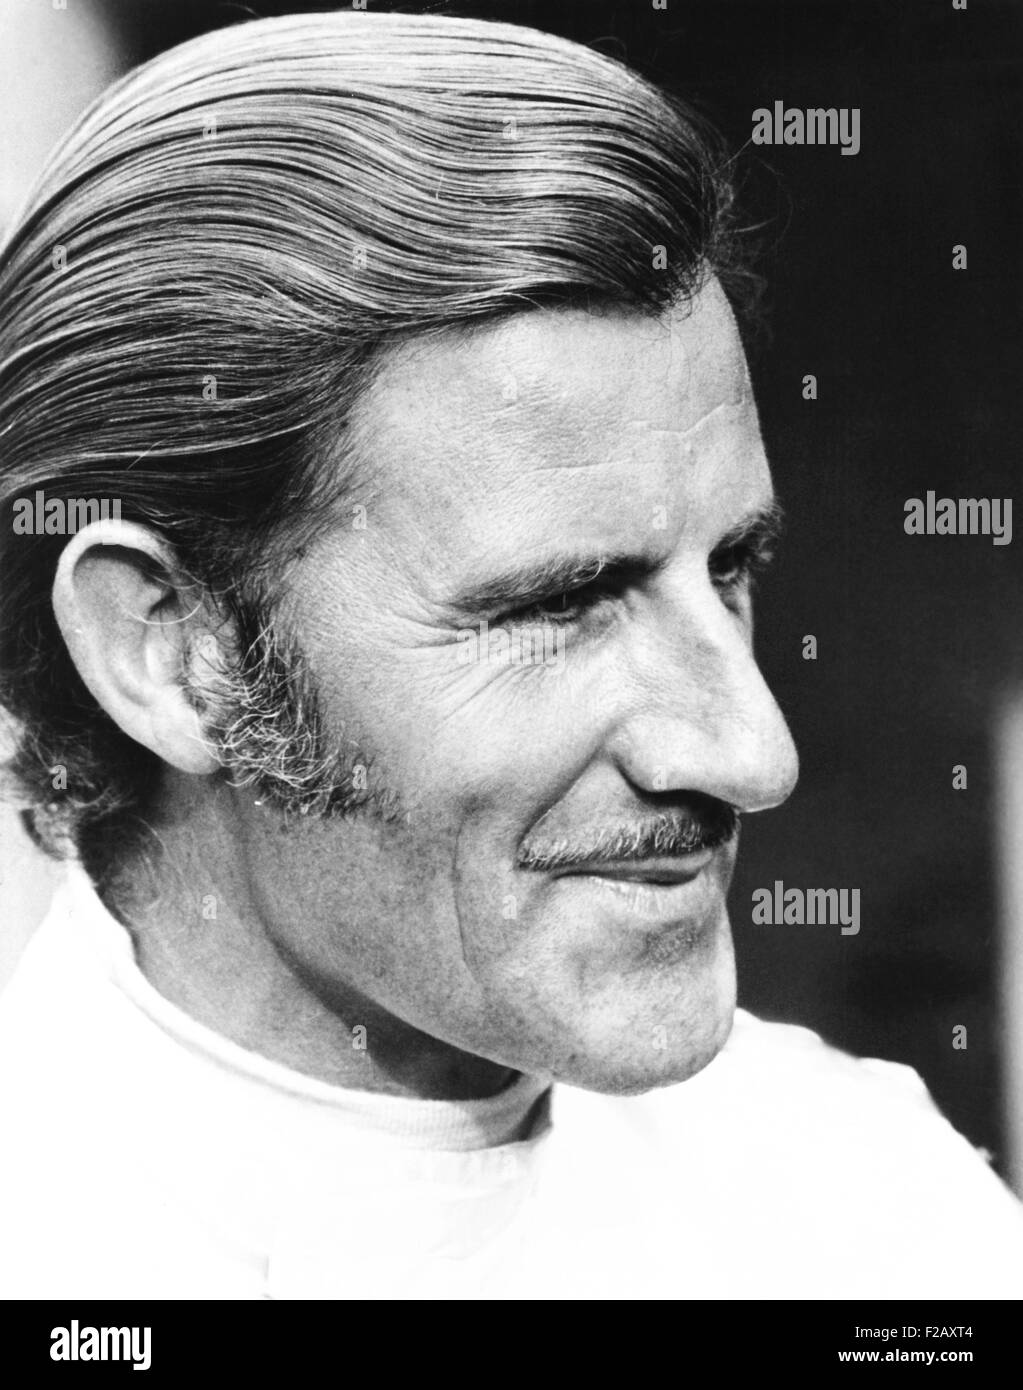 Graham Hill, British Formula One World Champion racing driver, ca. 1971. He is the only driver to win the Triple Crown of Motorsport: 24 Hours of Le Mans, Indianapolis 500, and Monaco Grand Prix. (CSU 2015 9 978) Stock Photo